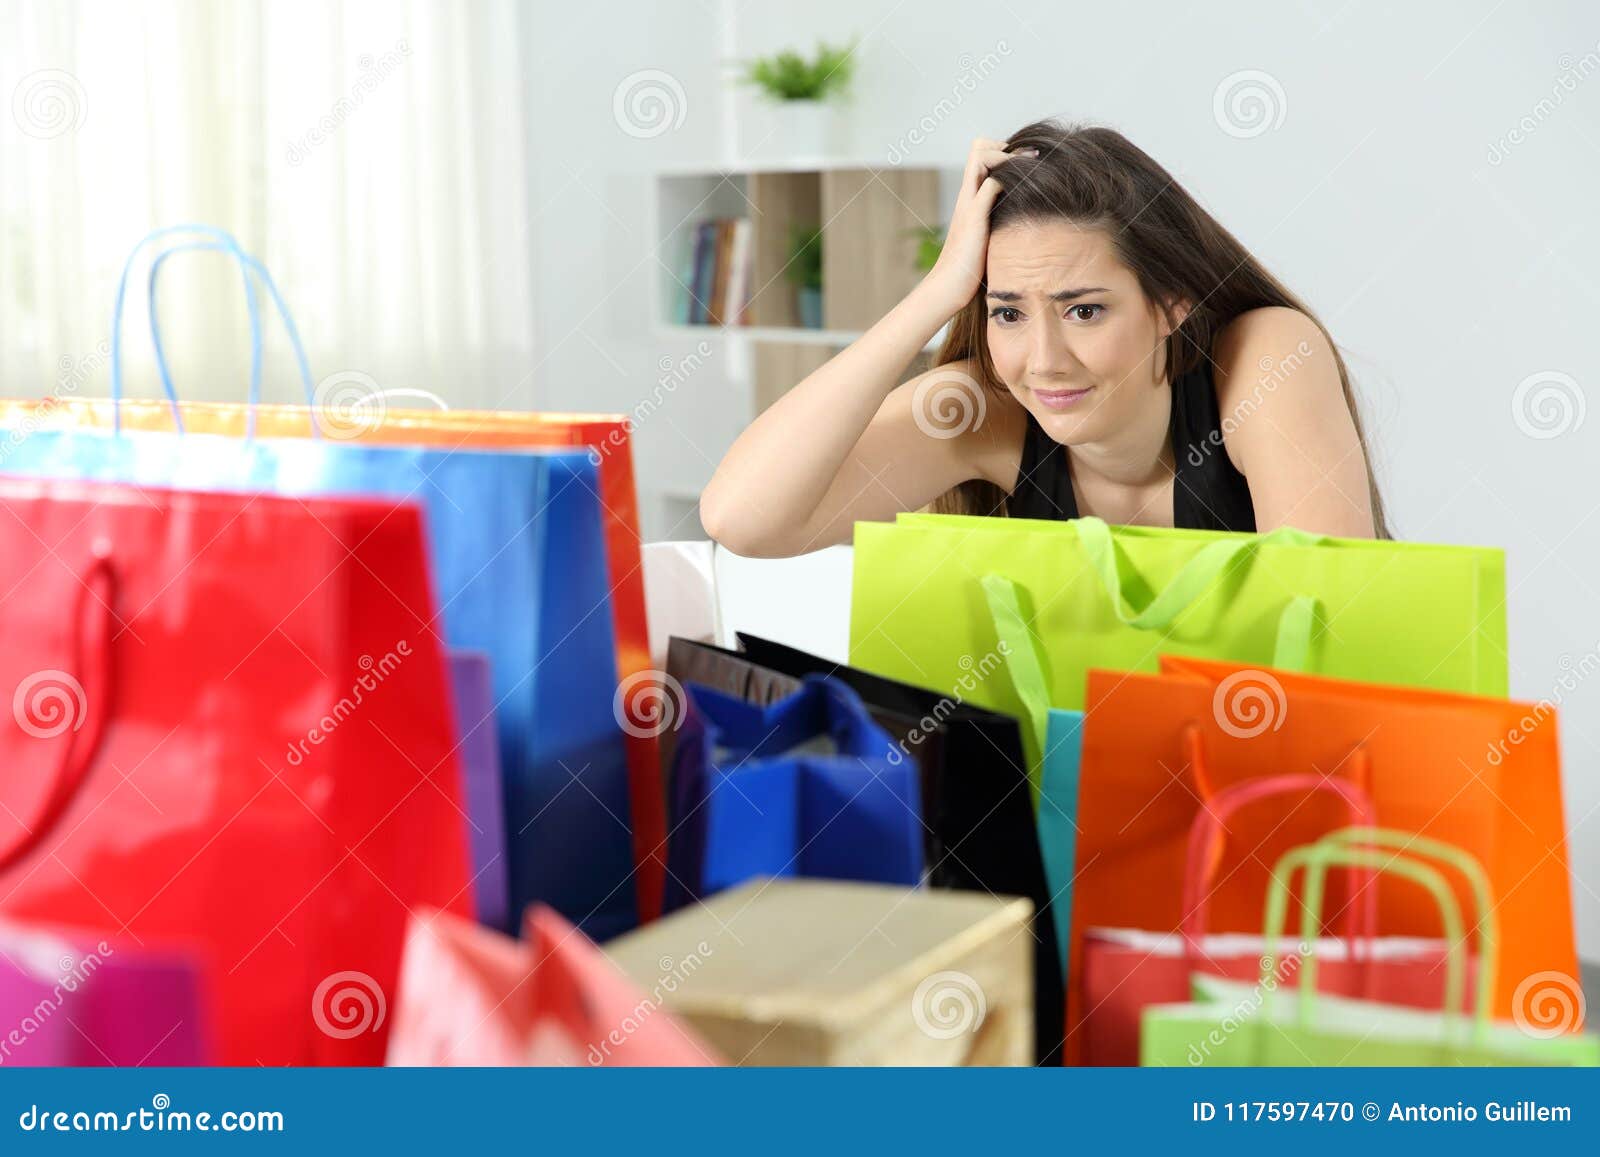 worried shopaholic woman after multiple purchases